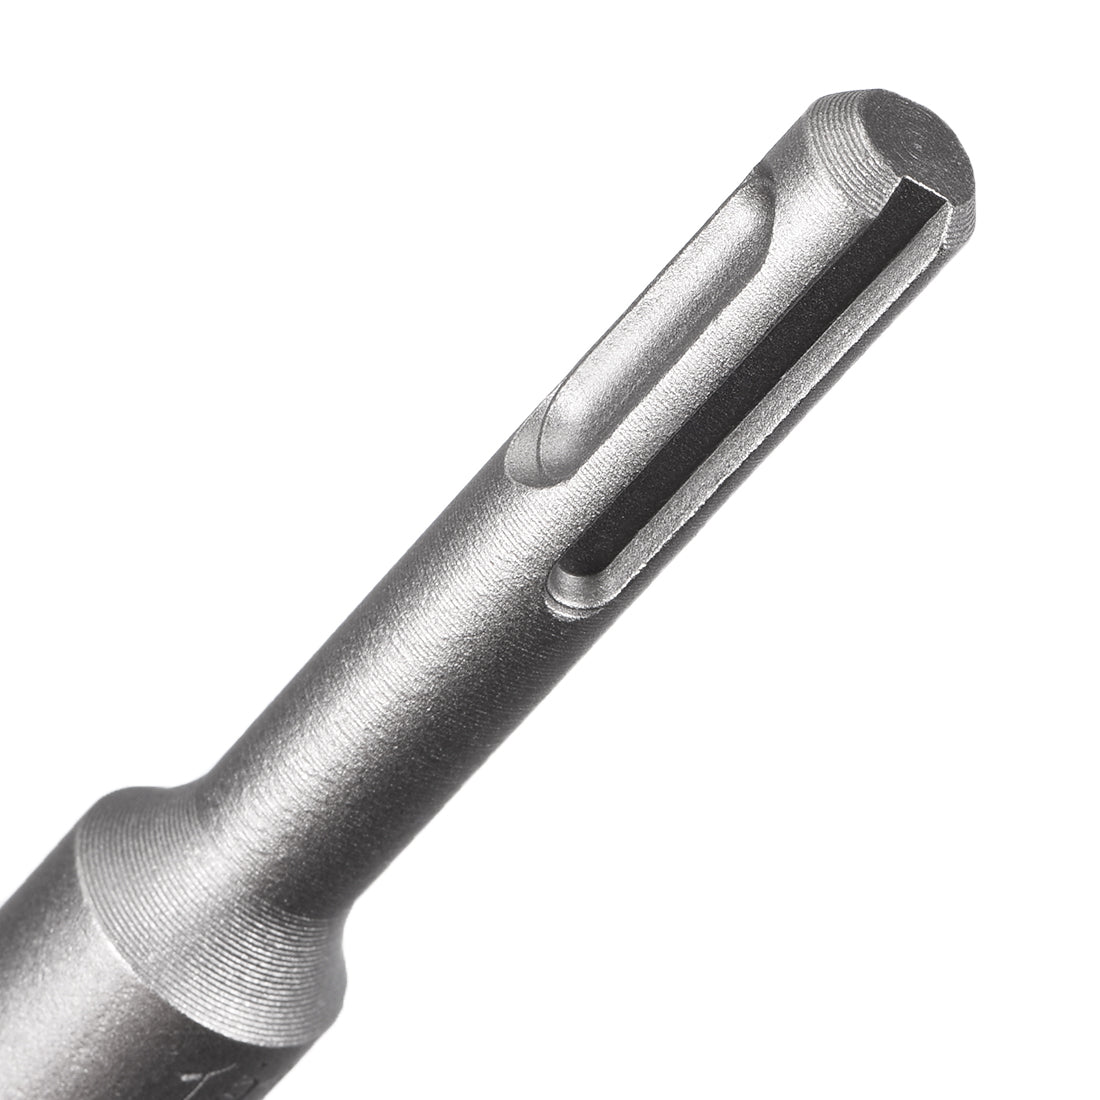 uxcell Uxcell Masonry Drill Bit 20mmx200mm 10mm Round Shank for Impact Drill